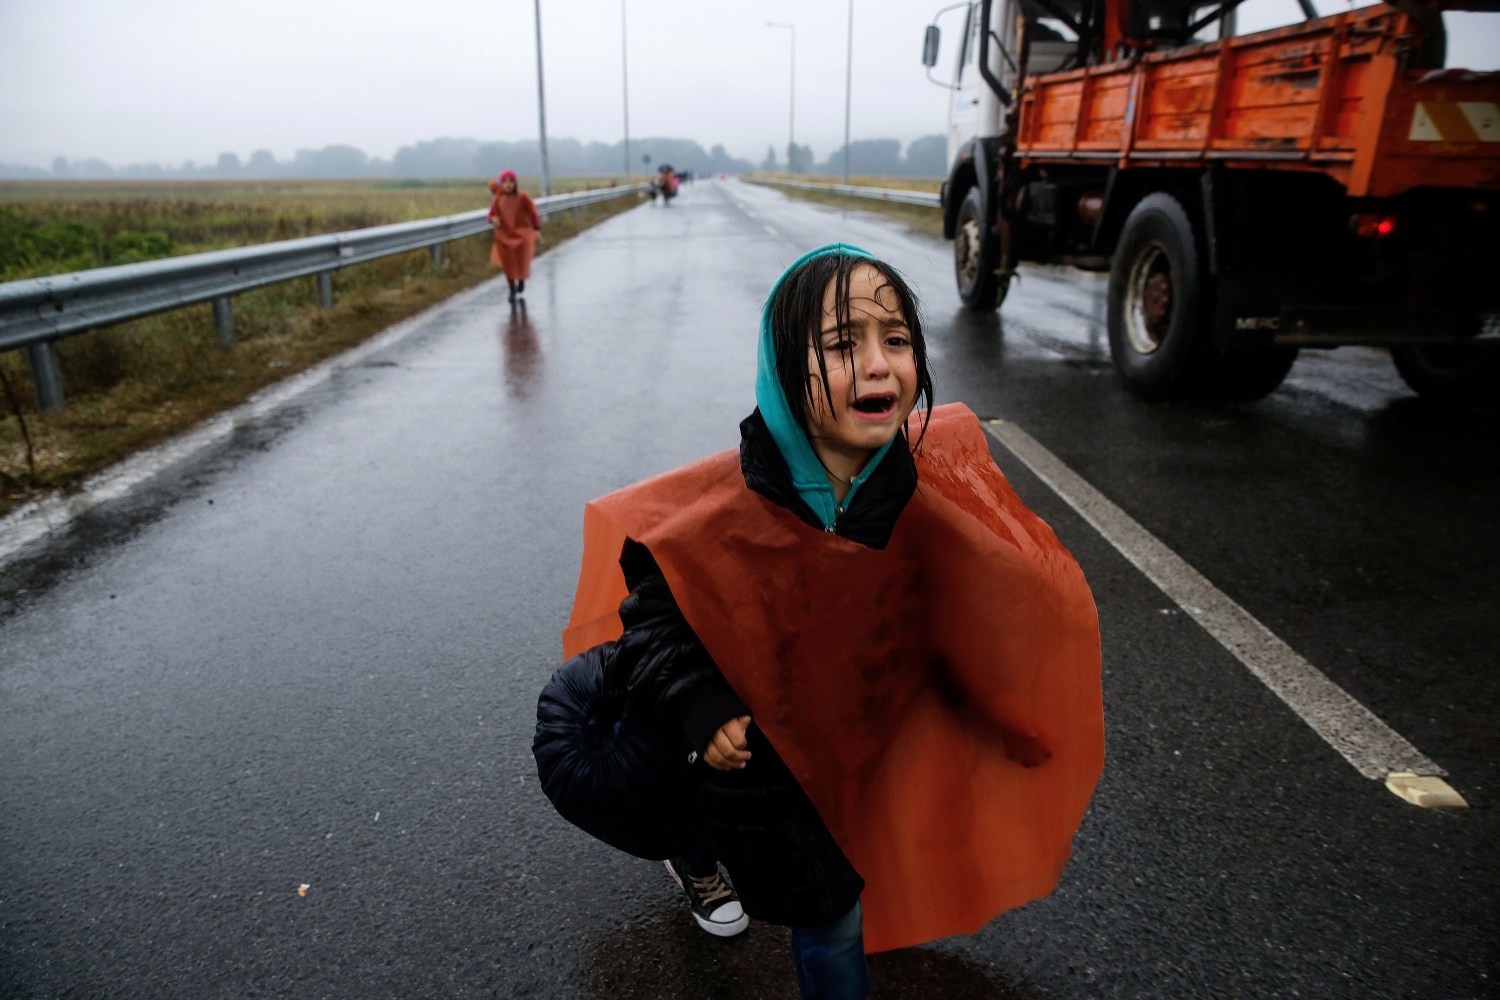 A Syrian refugee girl who was briefly separated from her parents cries as she walks through a rainstorm towards Greece's border with Macedonia, near the Greek village of Idomeni, September 10, 2015. Thousands of refugees and migrants, including many families with young children, have been left soaked after spending the night sleeping in the open in torrential rain on the Greek-Macedonian border. About 7,000 people waited in the mud of an open field near the northern Greek village of Idomeni to cross the border, with more arriving in trains, buses and taxis, as Macedonian police has imposed rationing in the flow of refugees.  REUTERS/Yannis Behrakis - S1BEUGOKOIAA